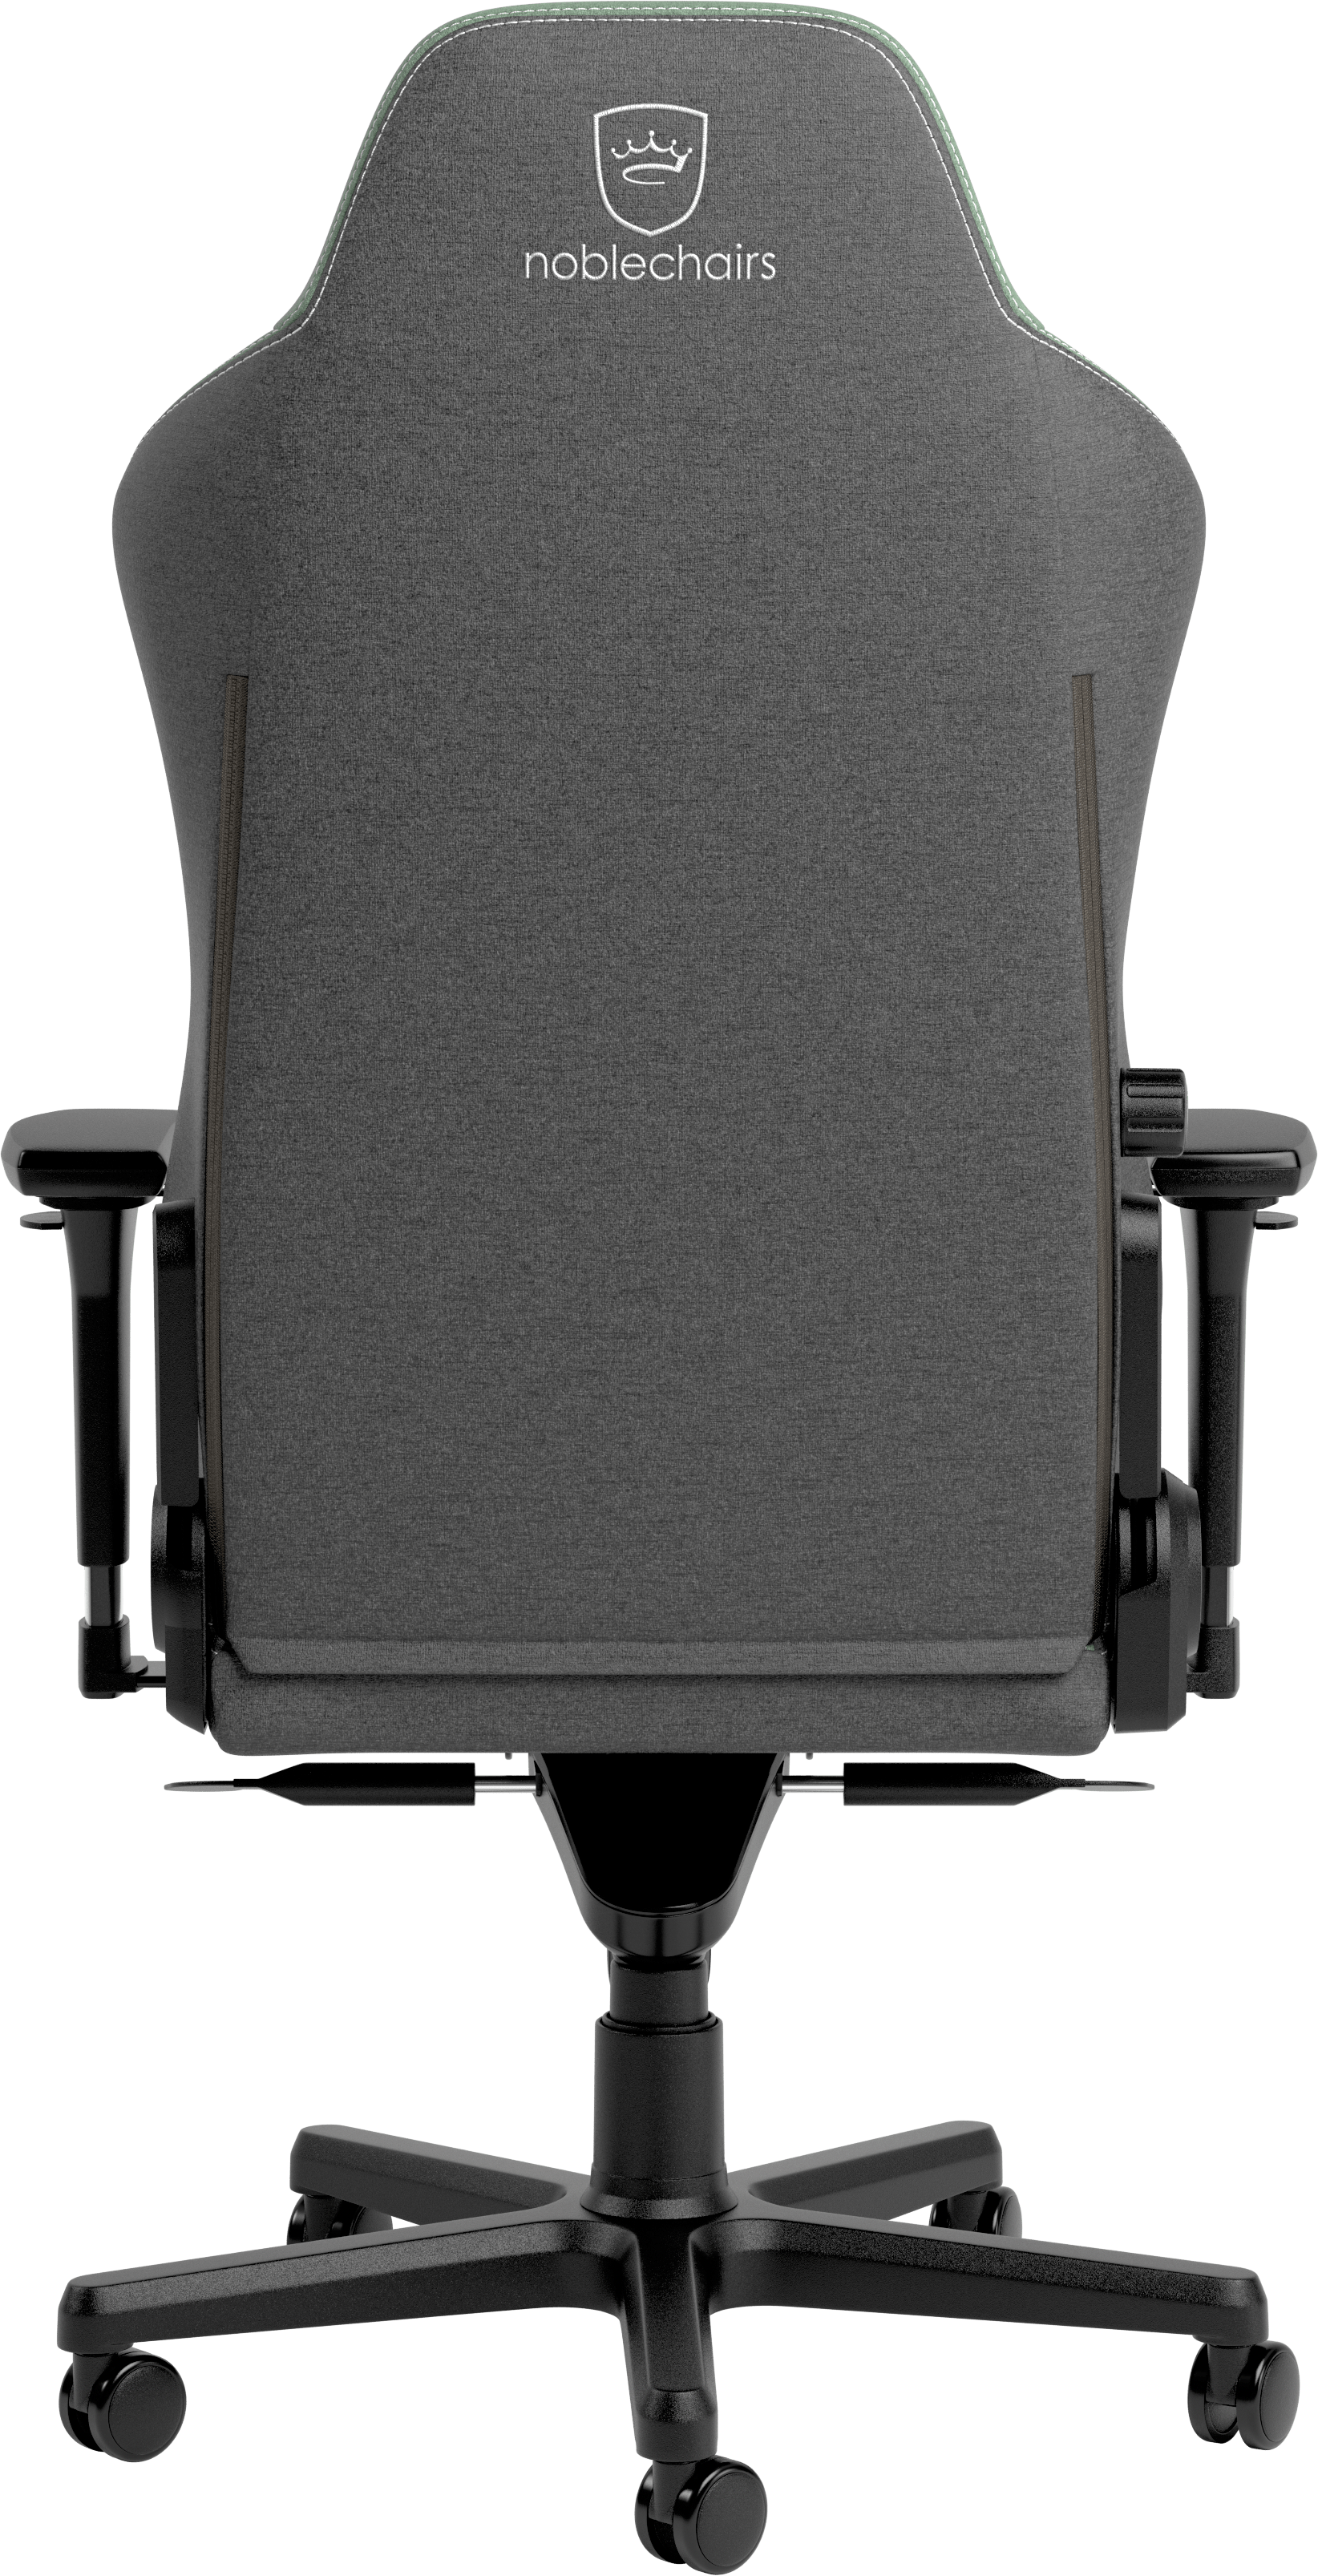 noblechairs HERO TX Two Tone Green Limited Edition fabric cover